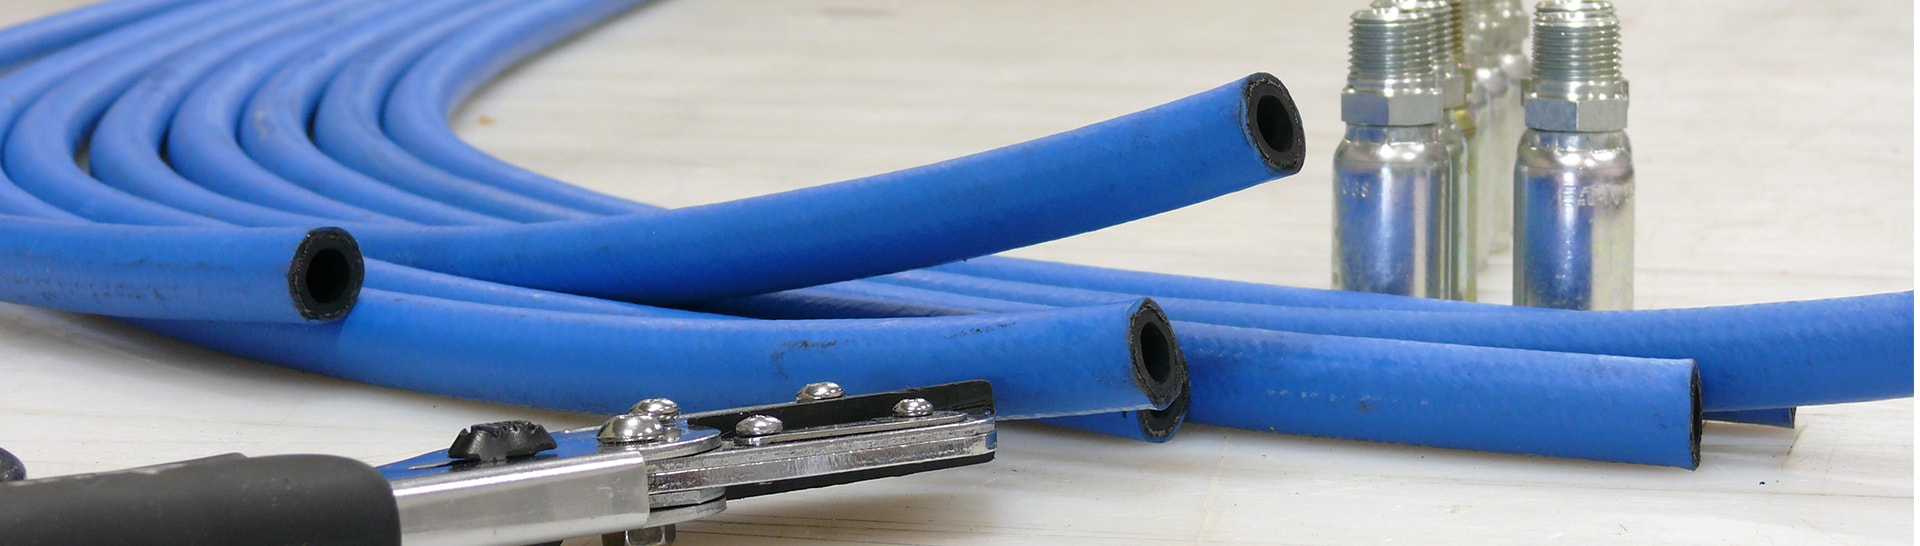 This is an image of rubber hose, fittings, and a tool.